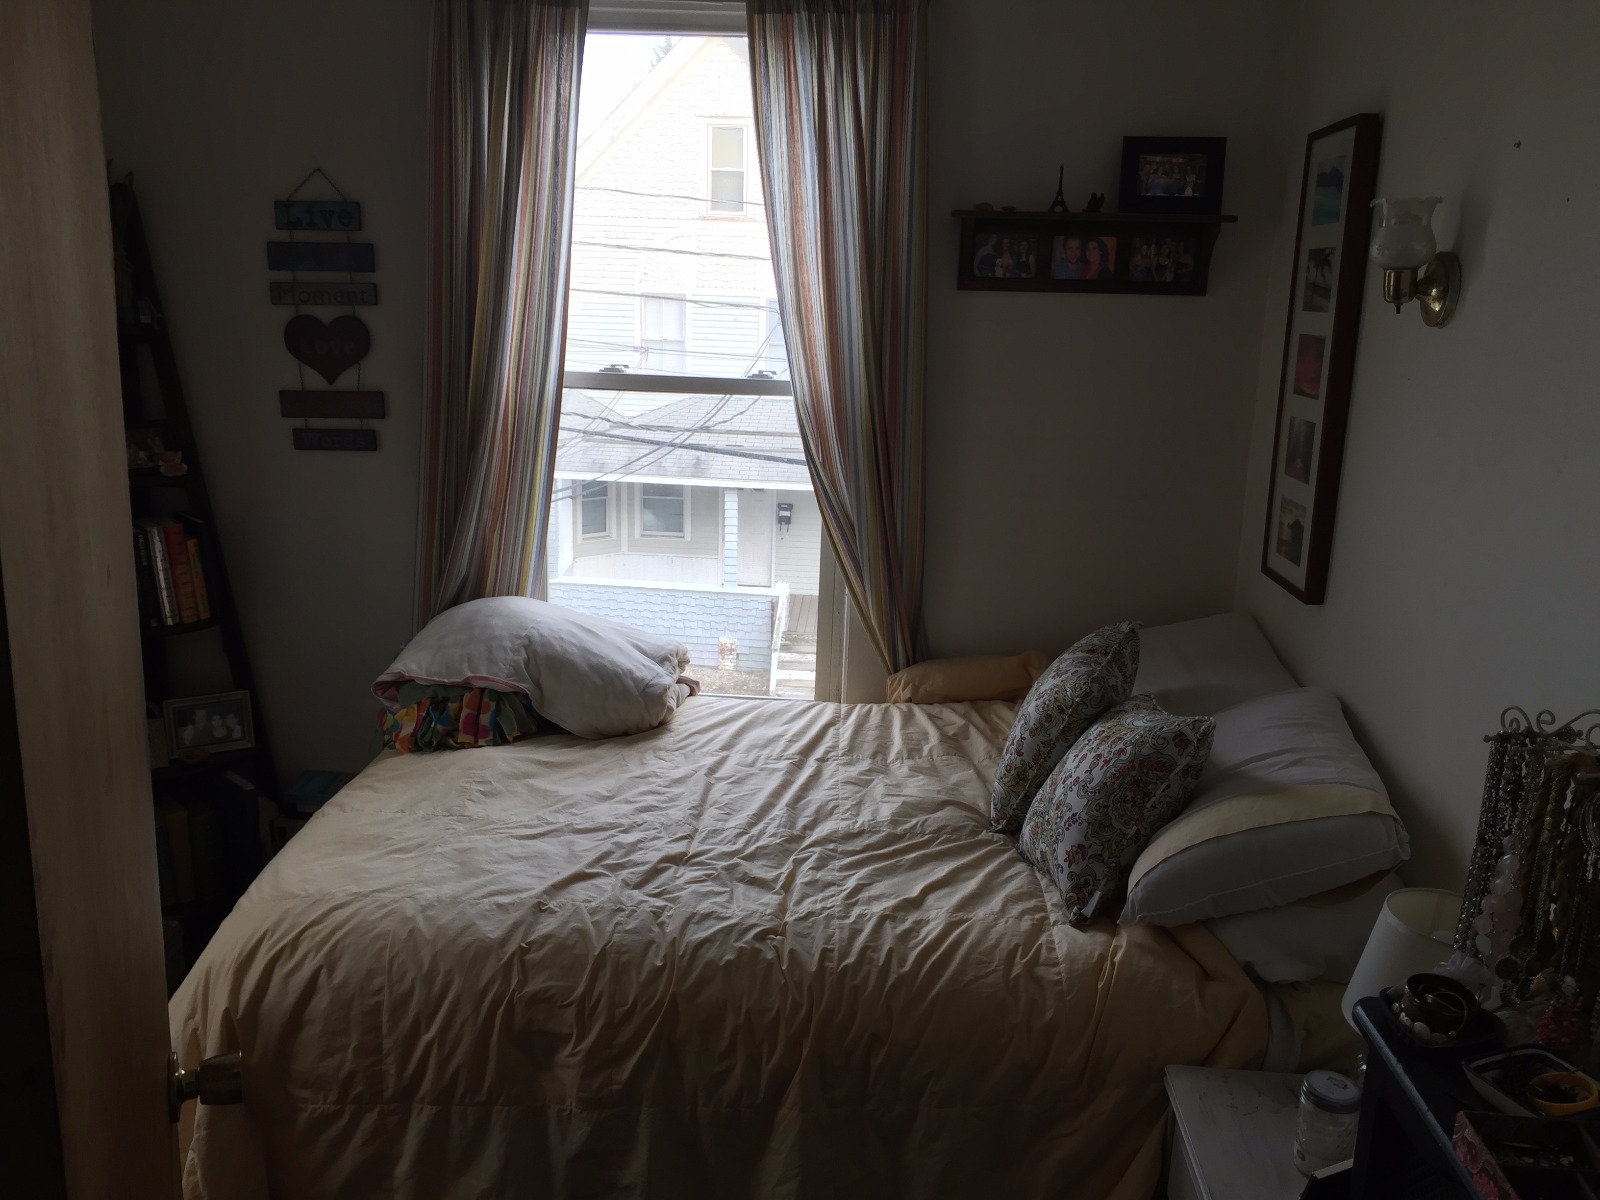 Photos of apartment on Clarendon,Somerville MA 02144